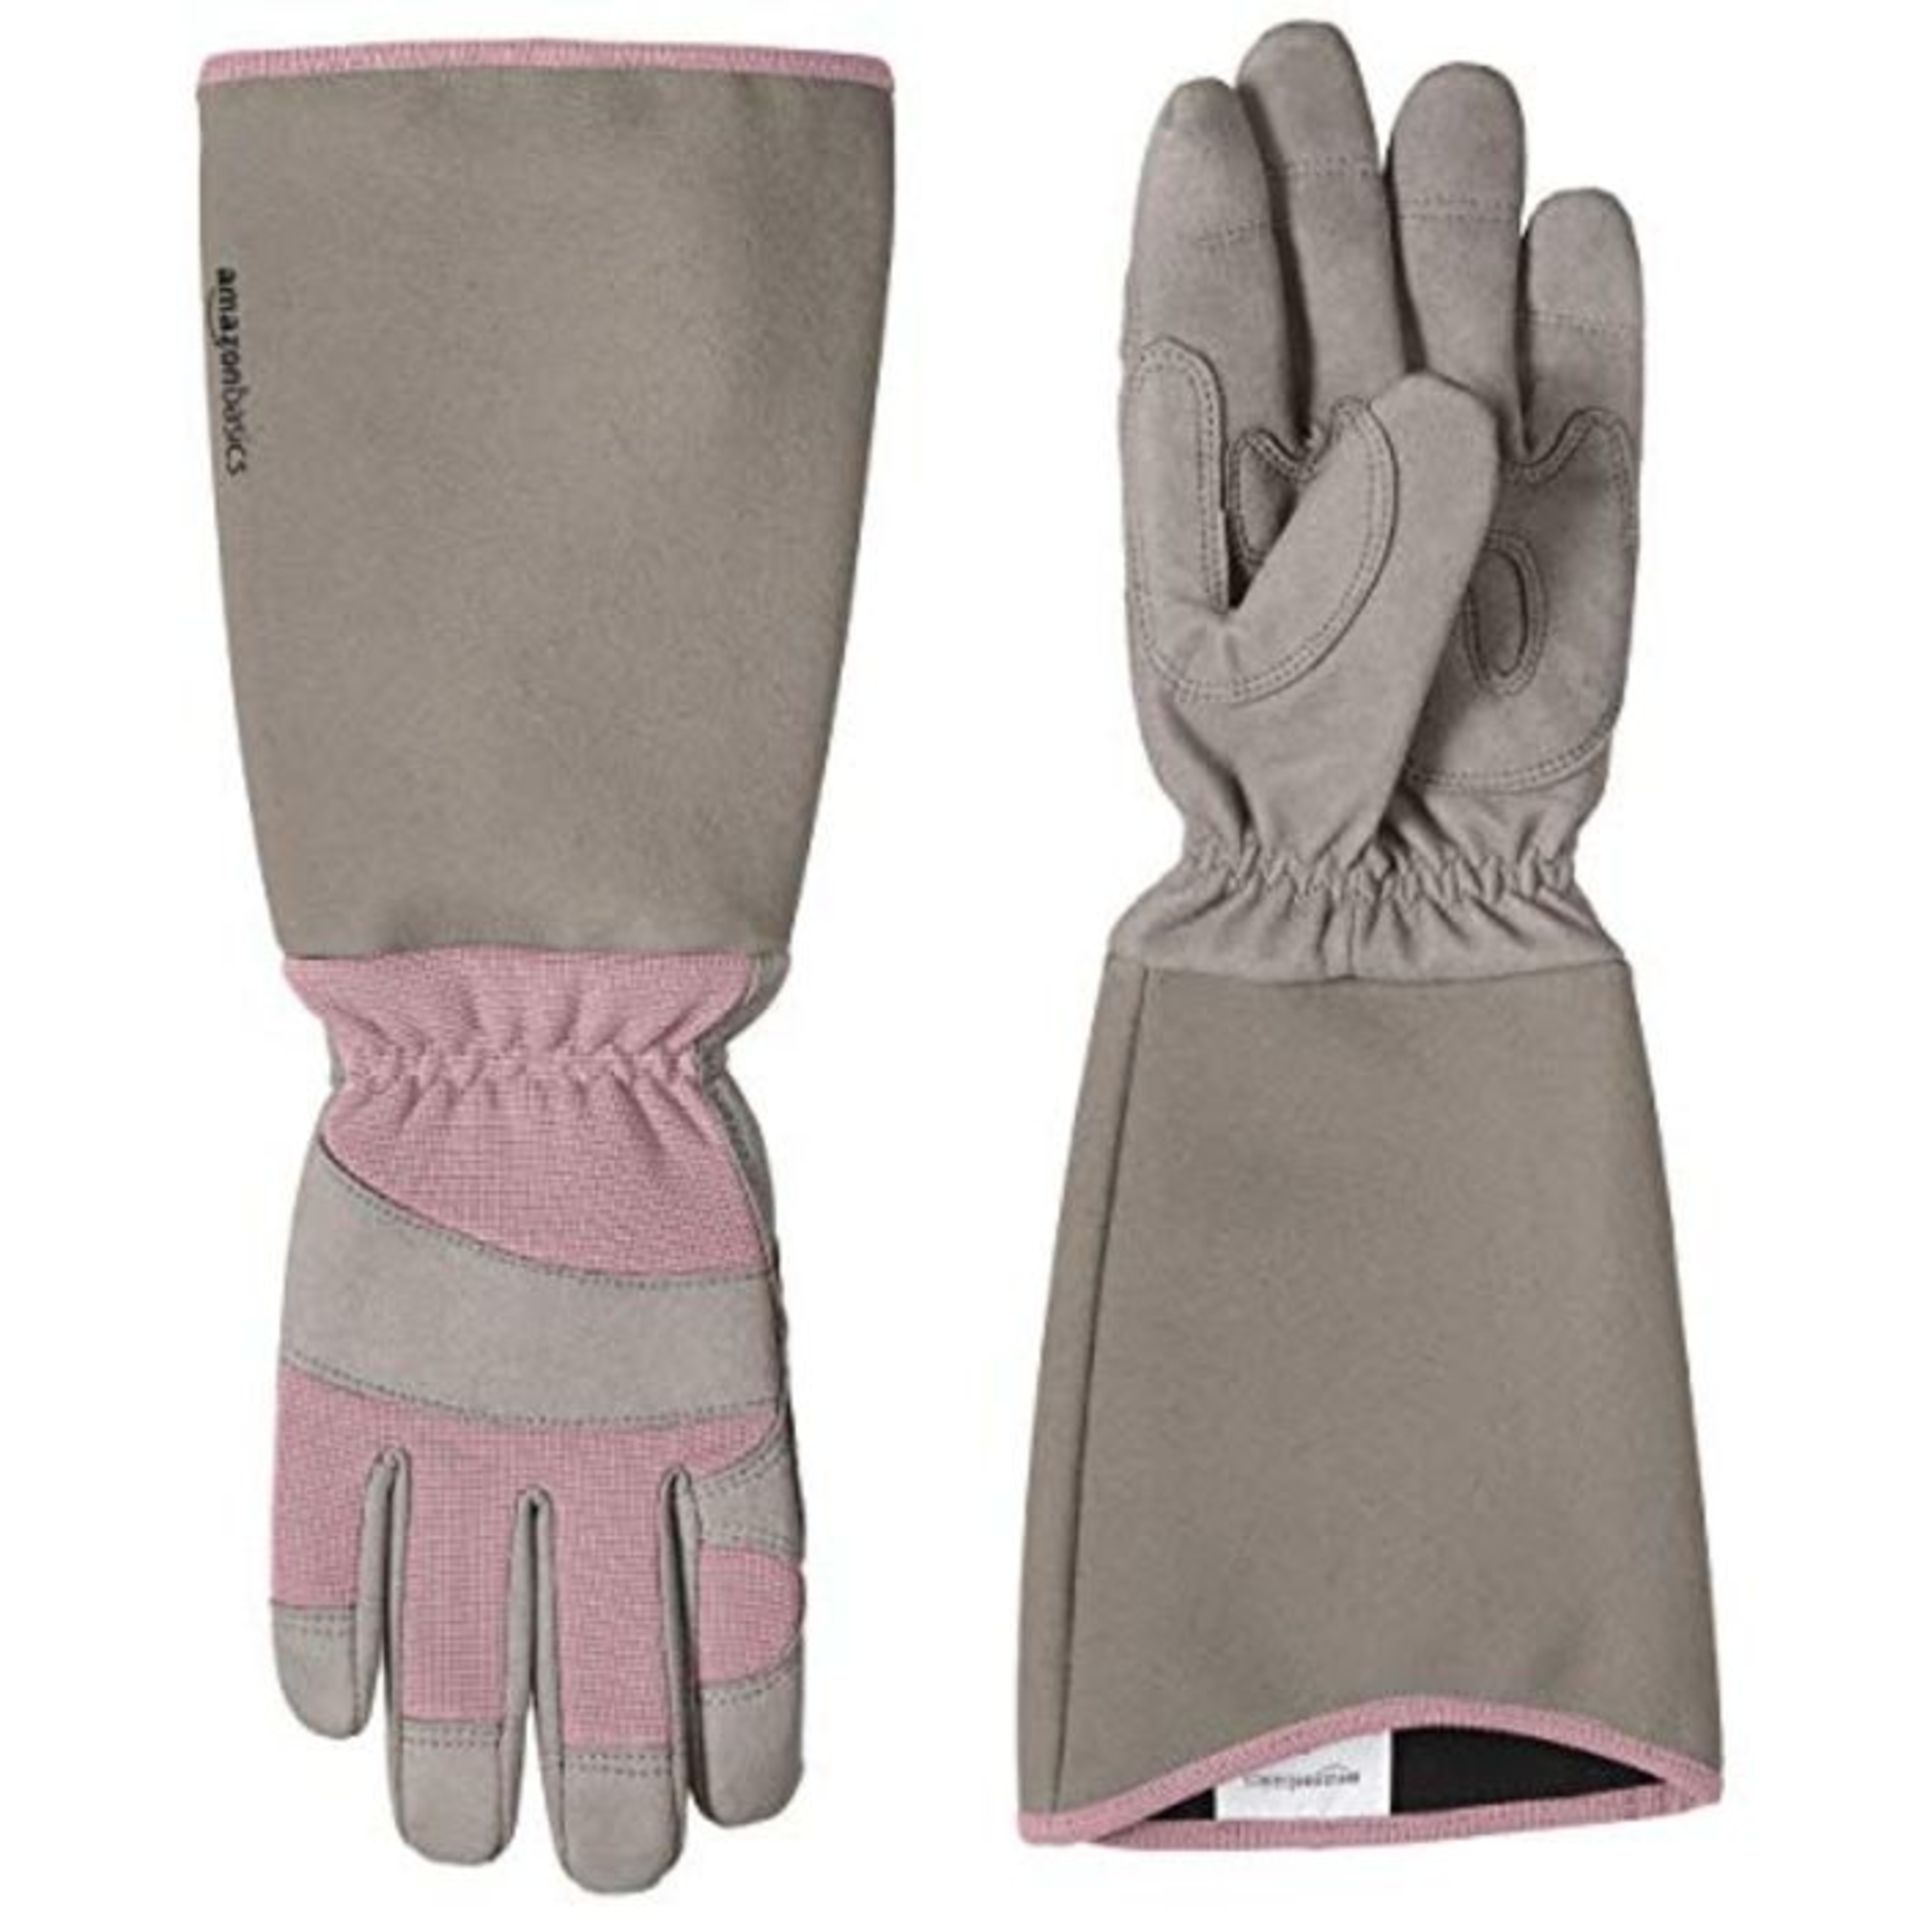 Amazon Basics Rose Pruning Thorn Proof Gardening Gloves with Forearm Protection, Pink,